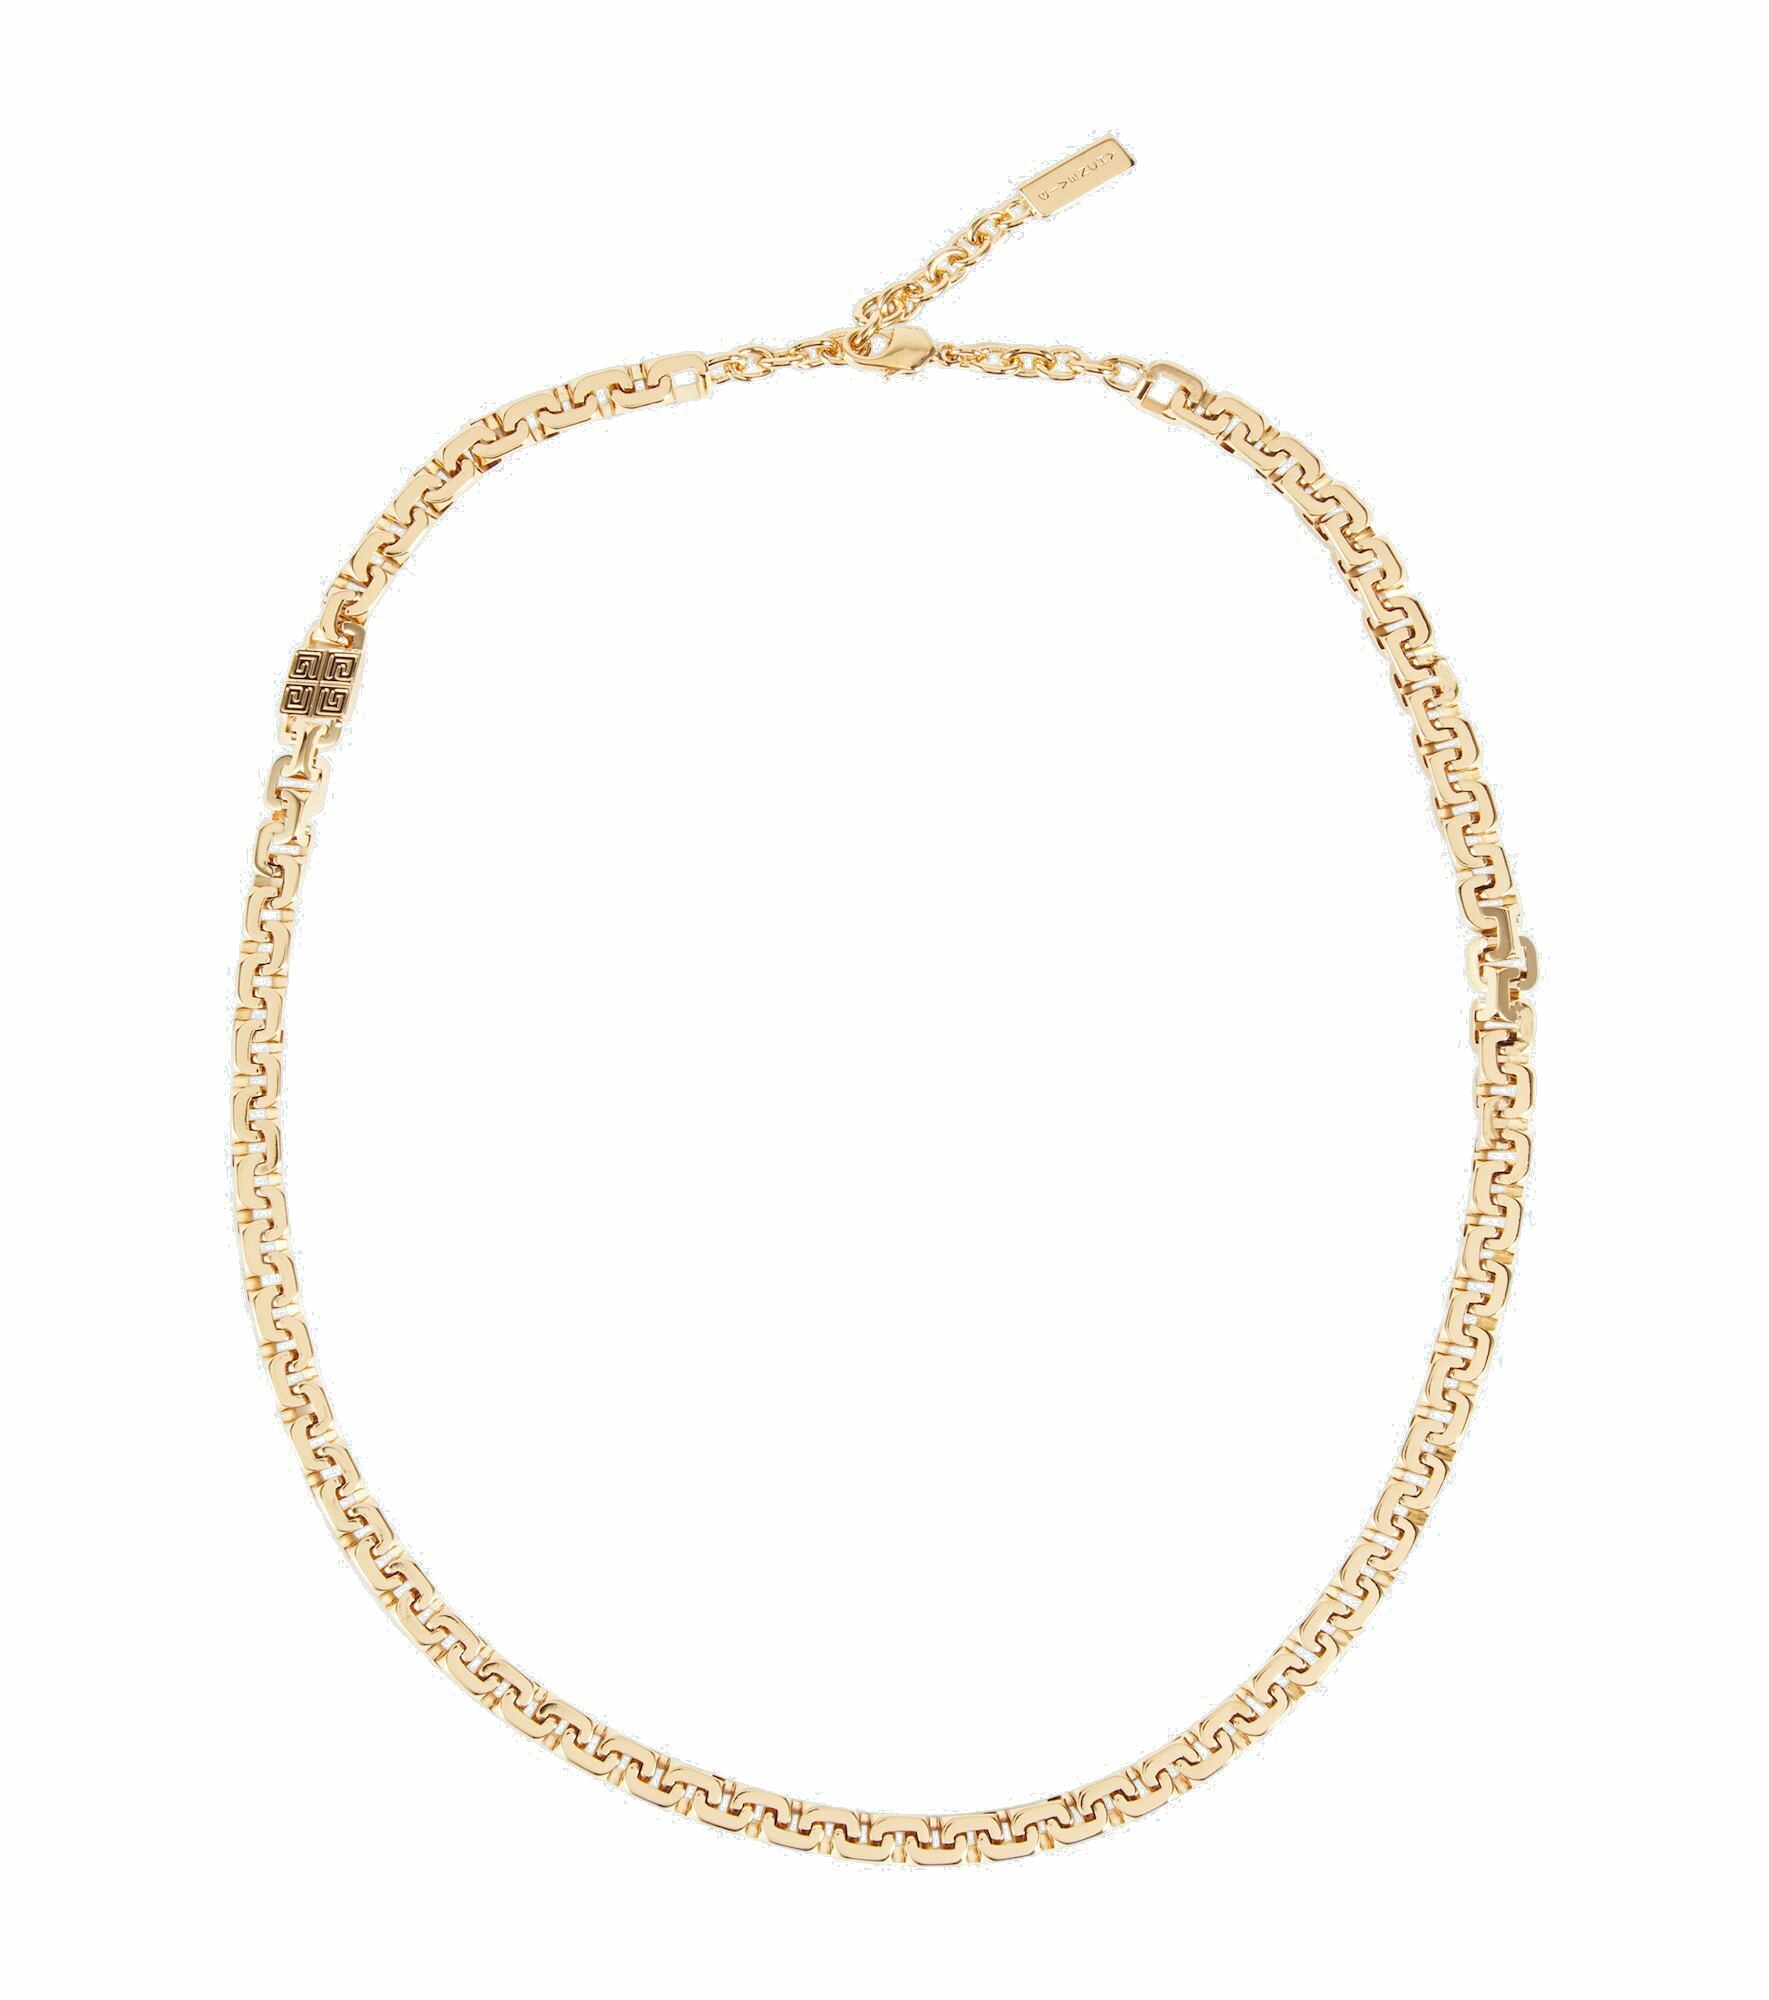 Givenchy - 4G gold-toned necklace Givenchy